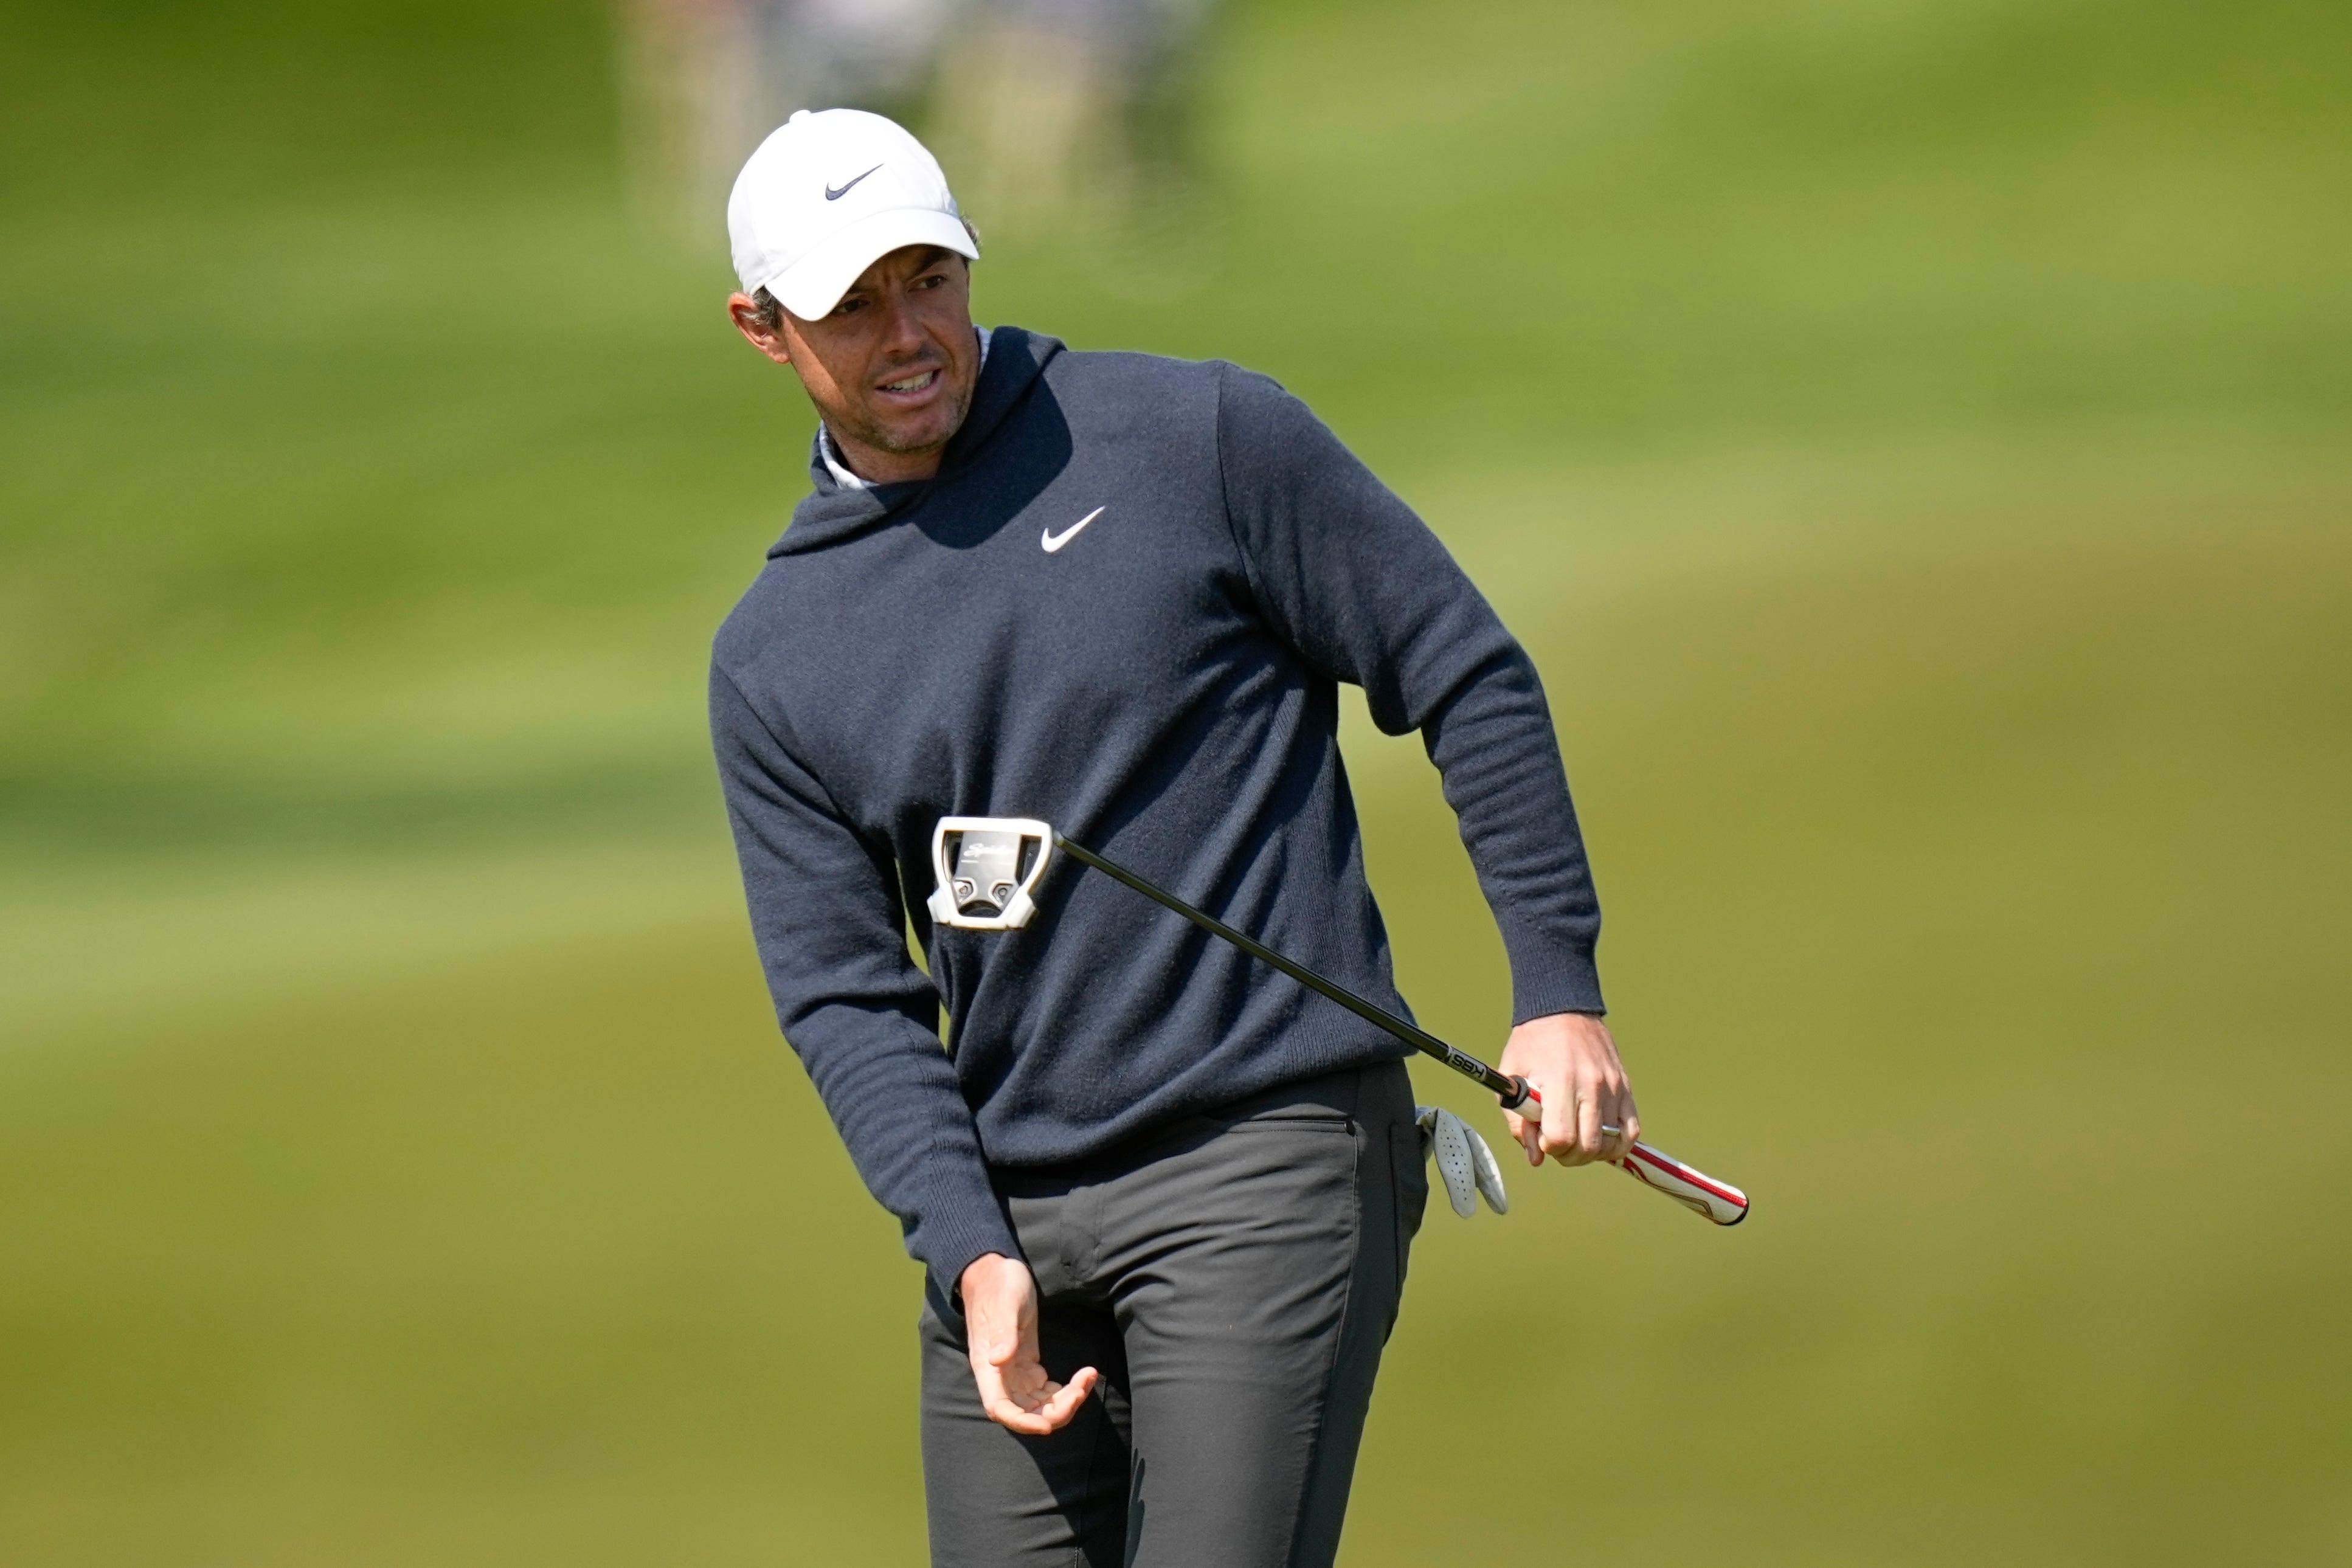 Rory McIlroy was fighting hard on the opening day at Oak Hill